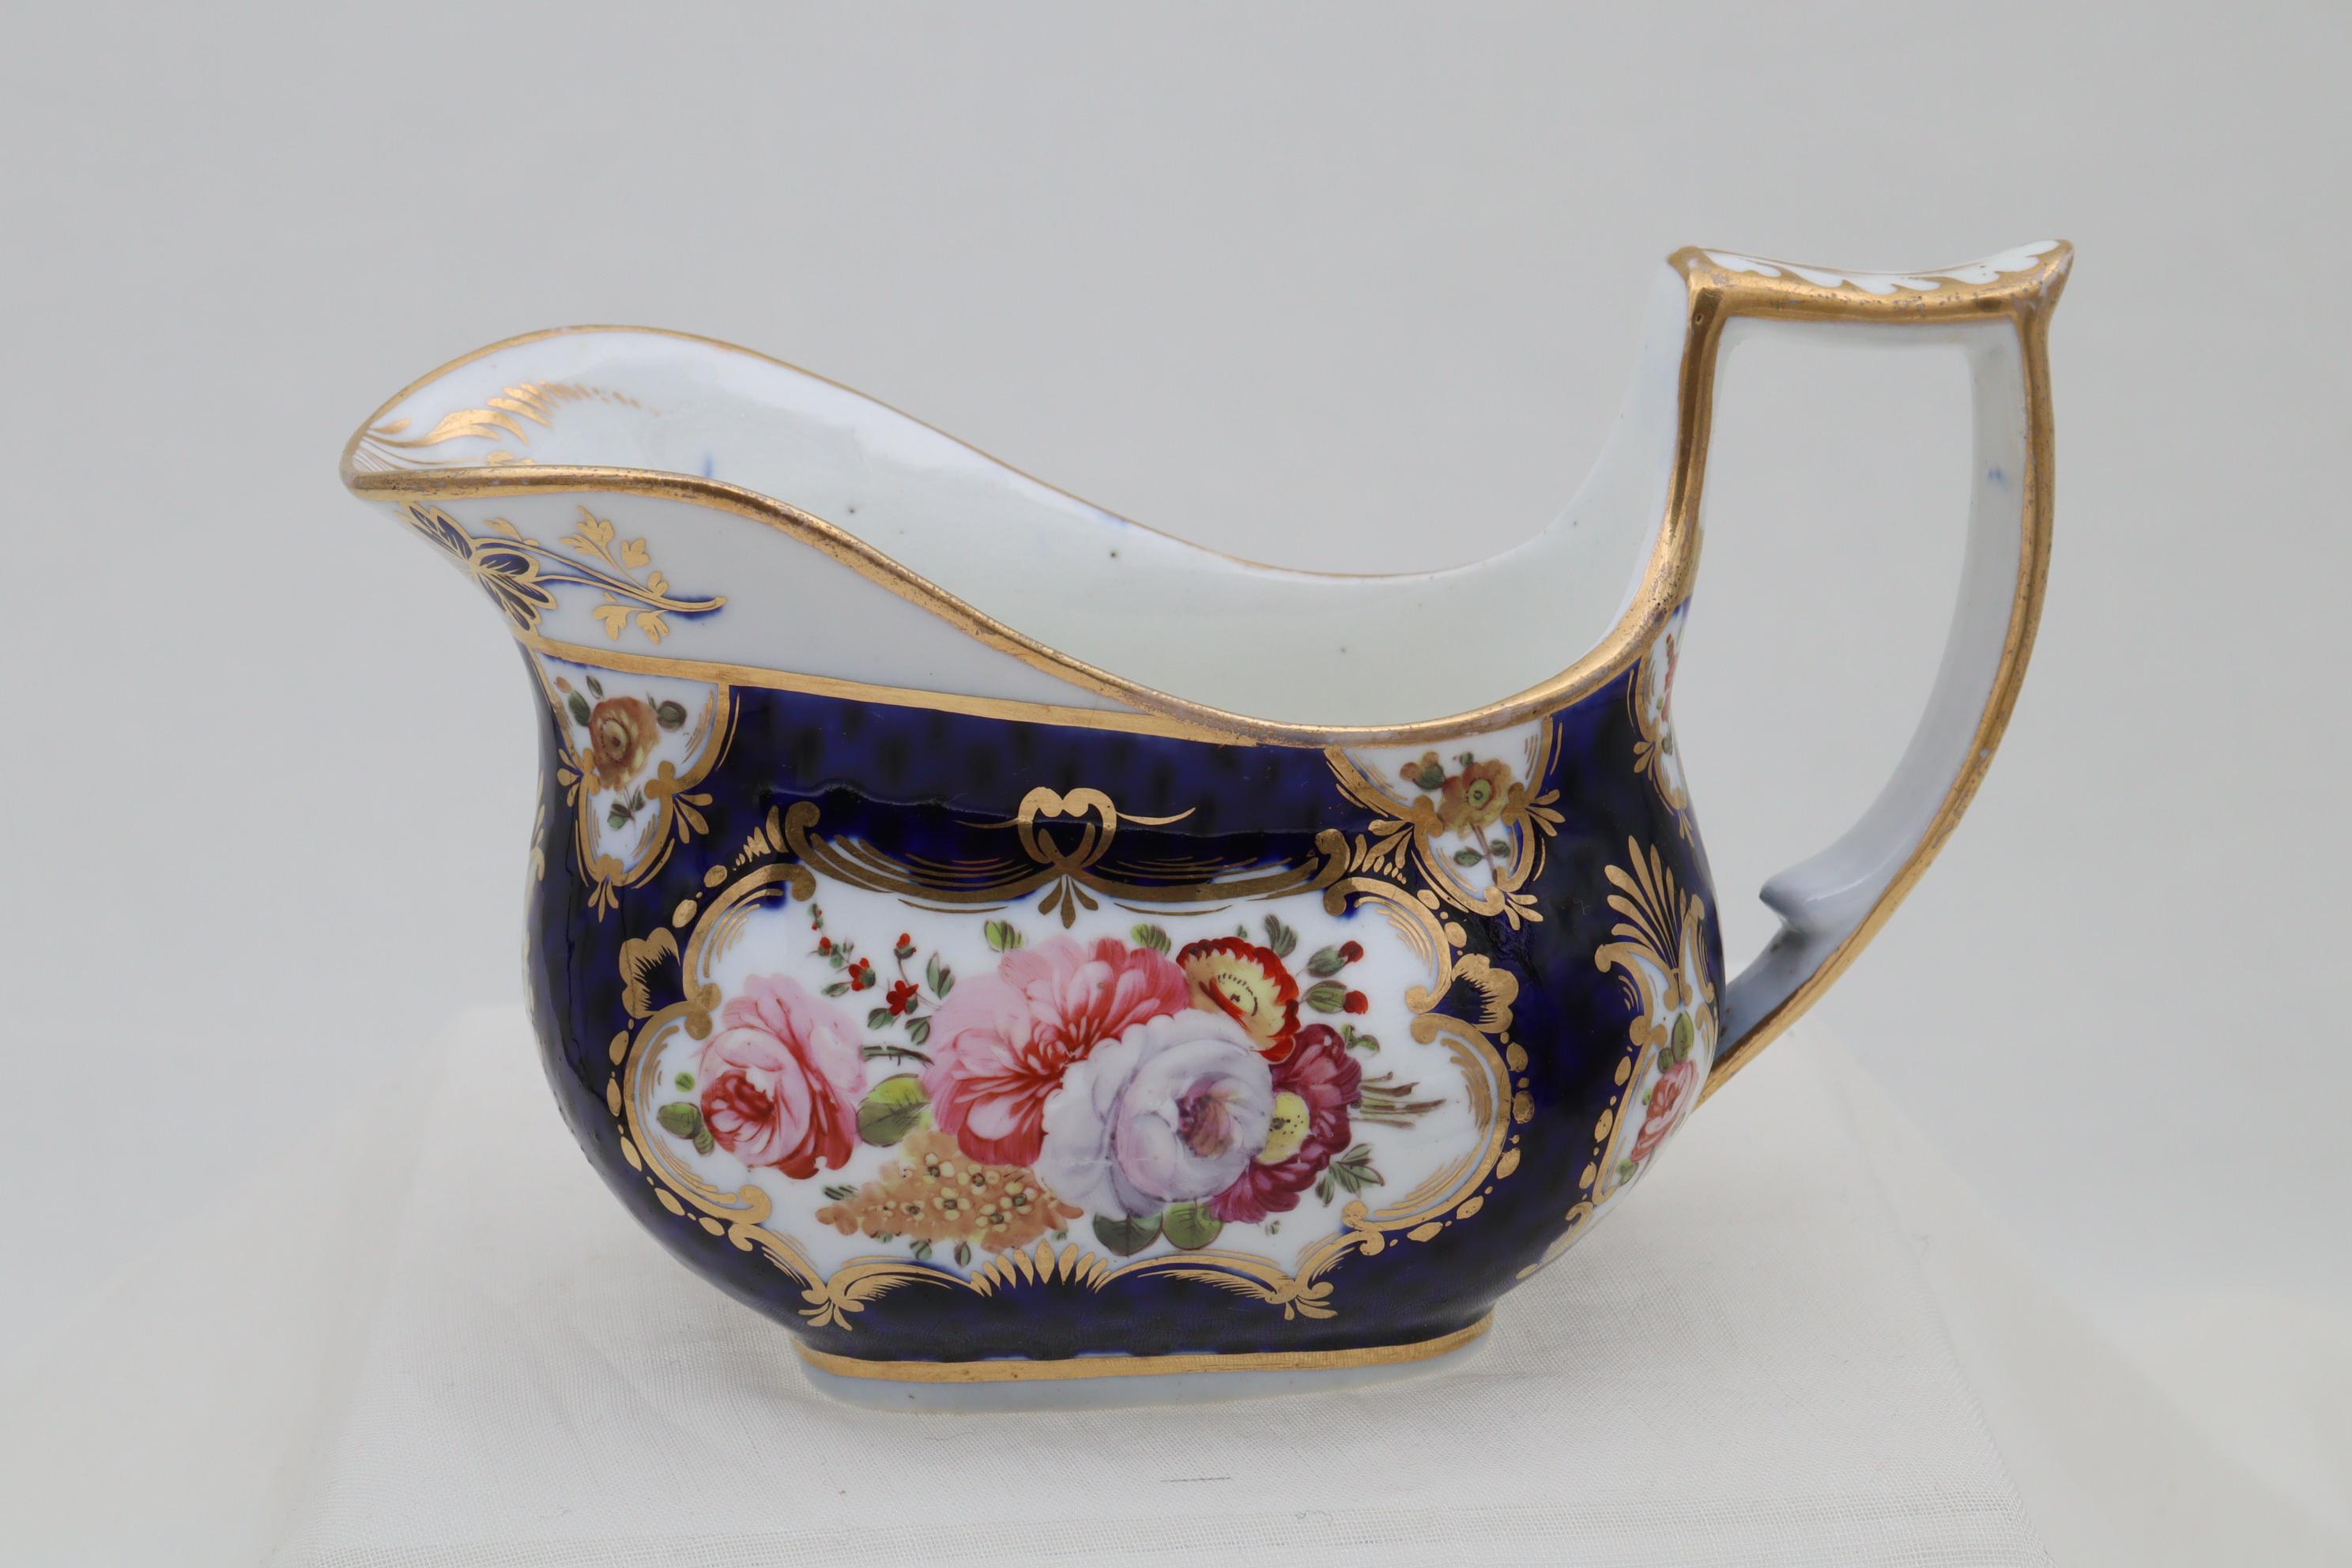 This very attractive hand painted porcelain creamer is by John Rose Coalport and is decorated with cartouches of colourful floral sprays, outlined in gilding, all on a Worcester type scale blue ground. The shape of the creamer is known as the London